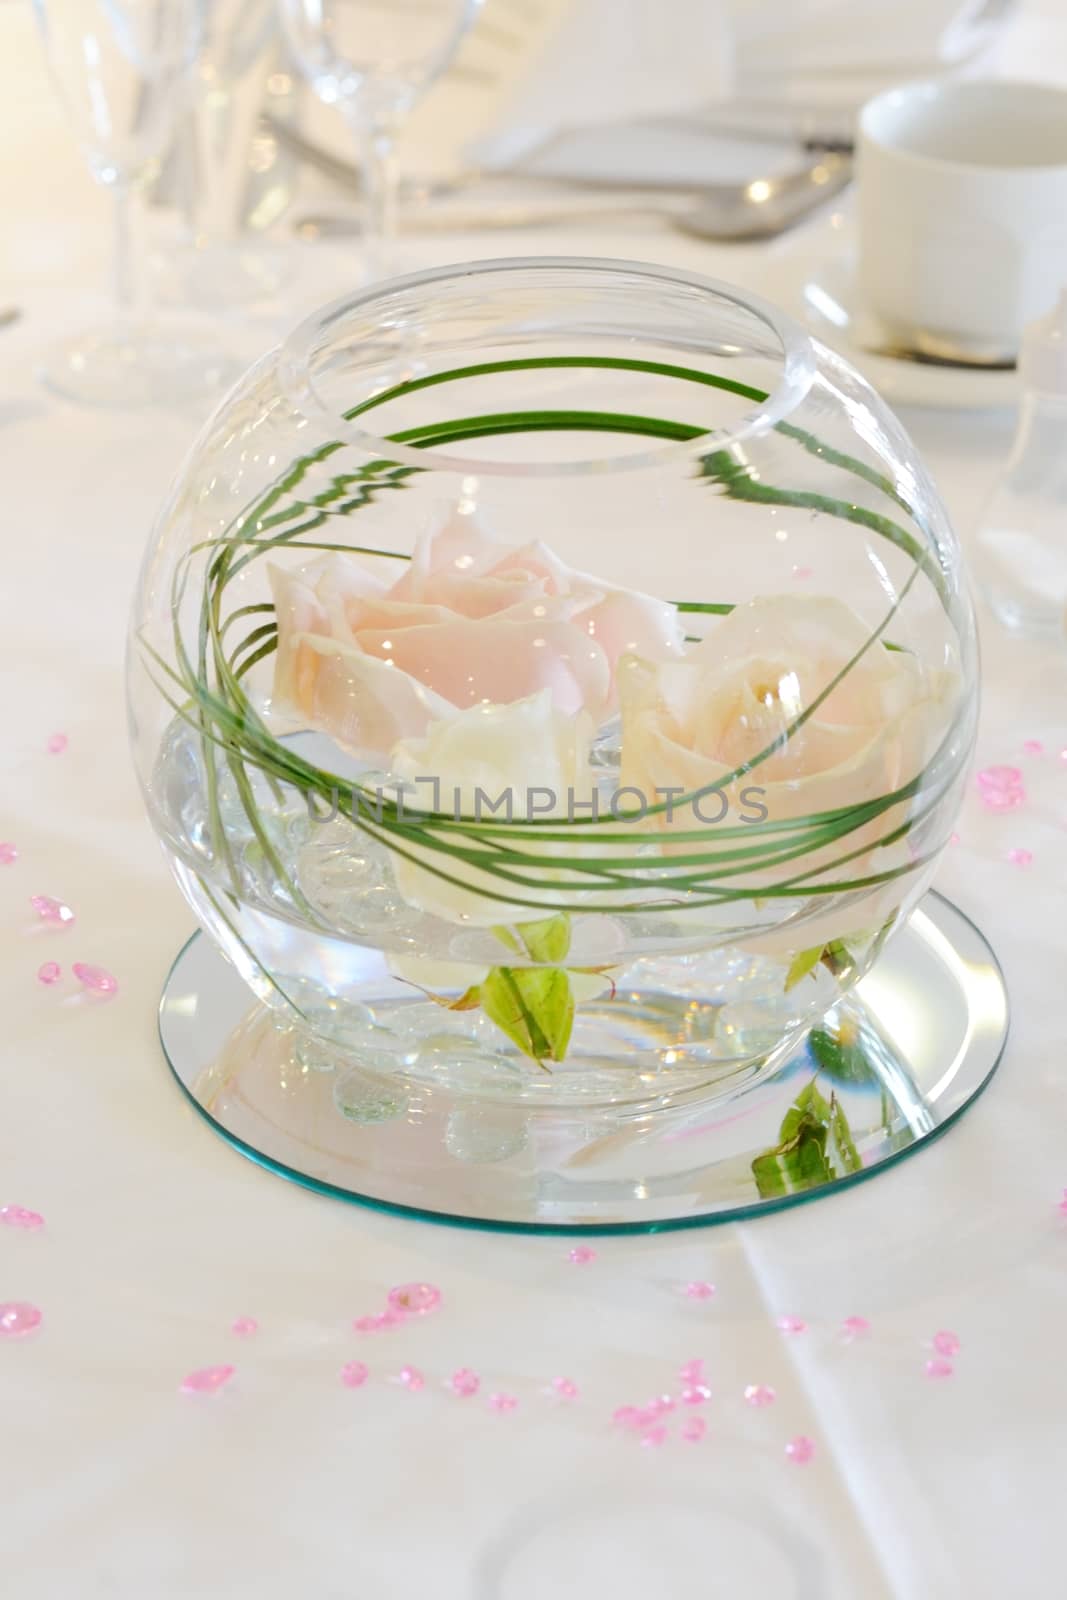 Flower bowl decoration by kmwphotography